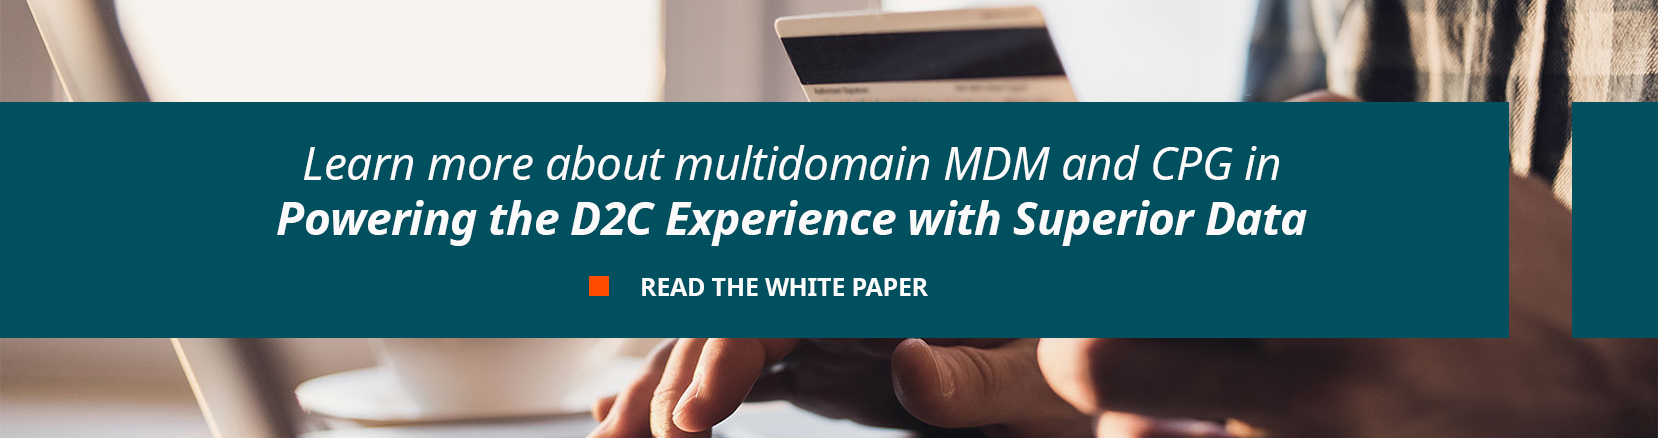 Powering the D2C Experience with Superior Data